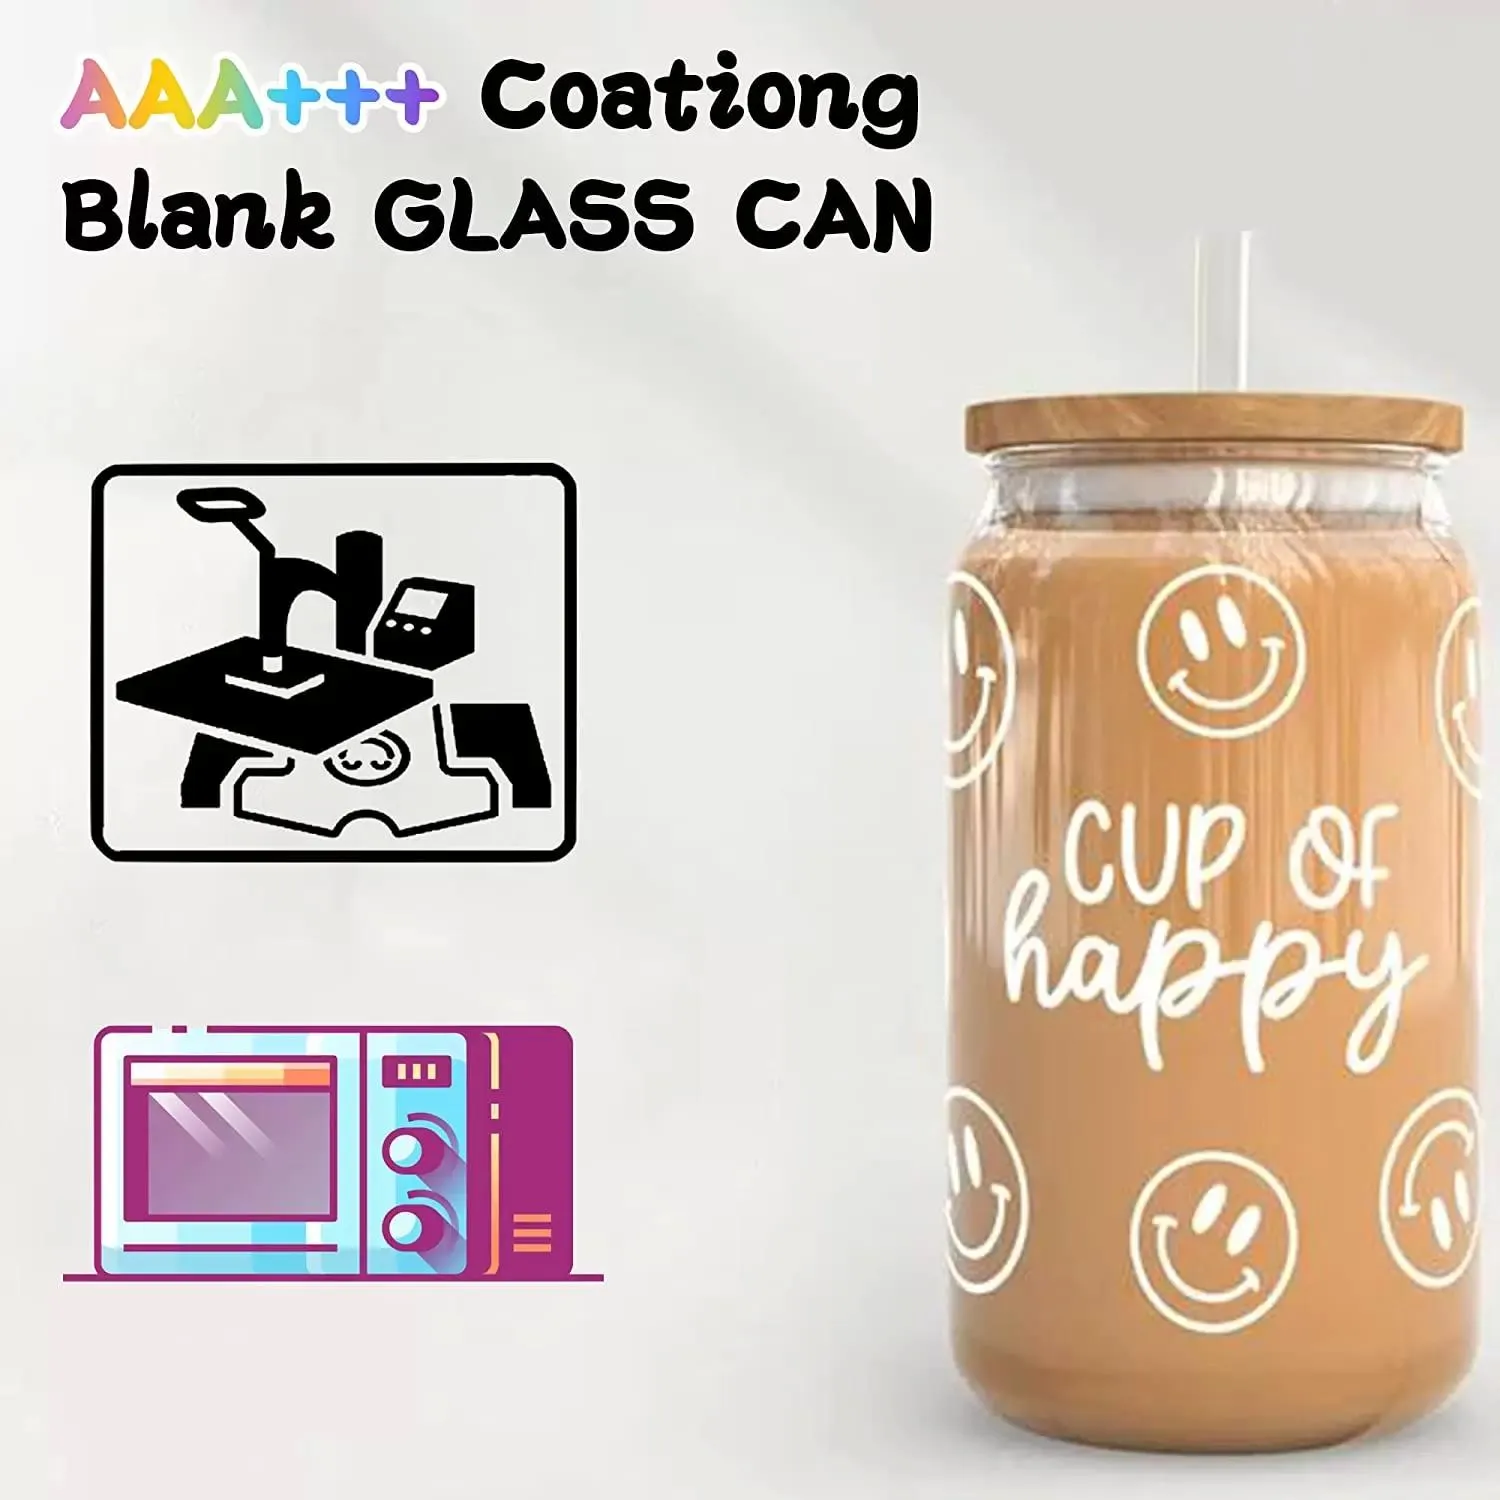 16oz Can Shaped Glass Cup with Bamboo Lid and Reusable Glass Straw, Glass  Cups Reusable Beer Can Glass for Beer Cocktail Coffee Tea